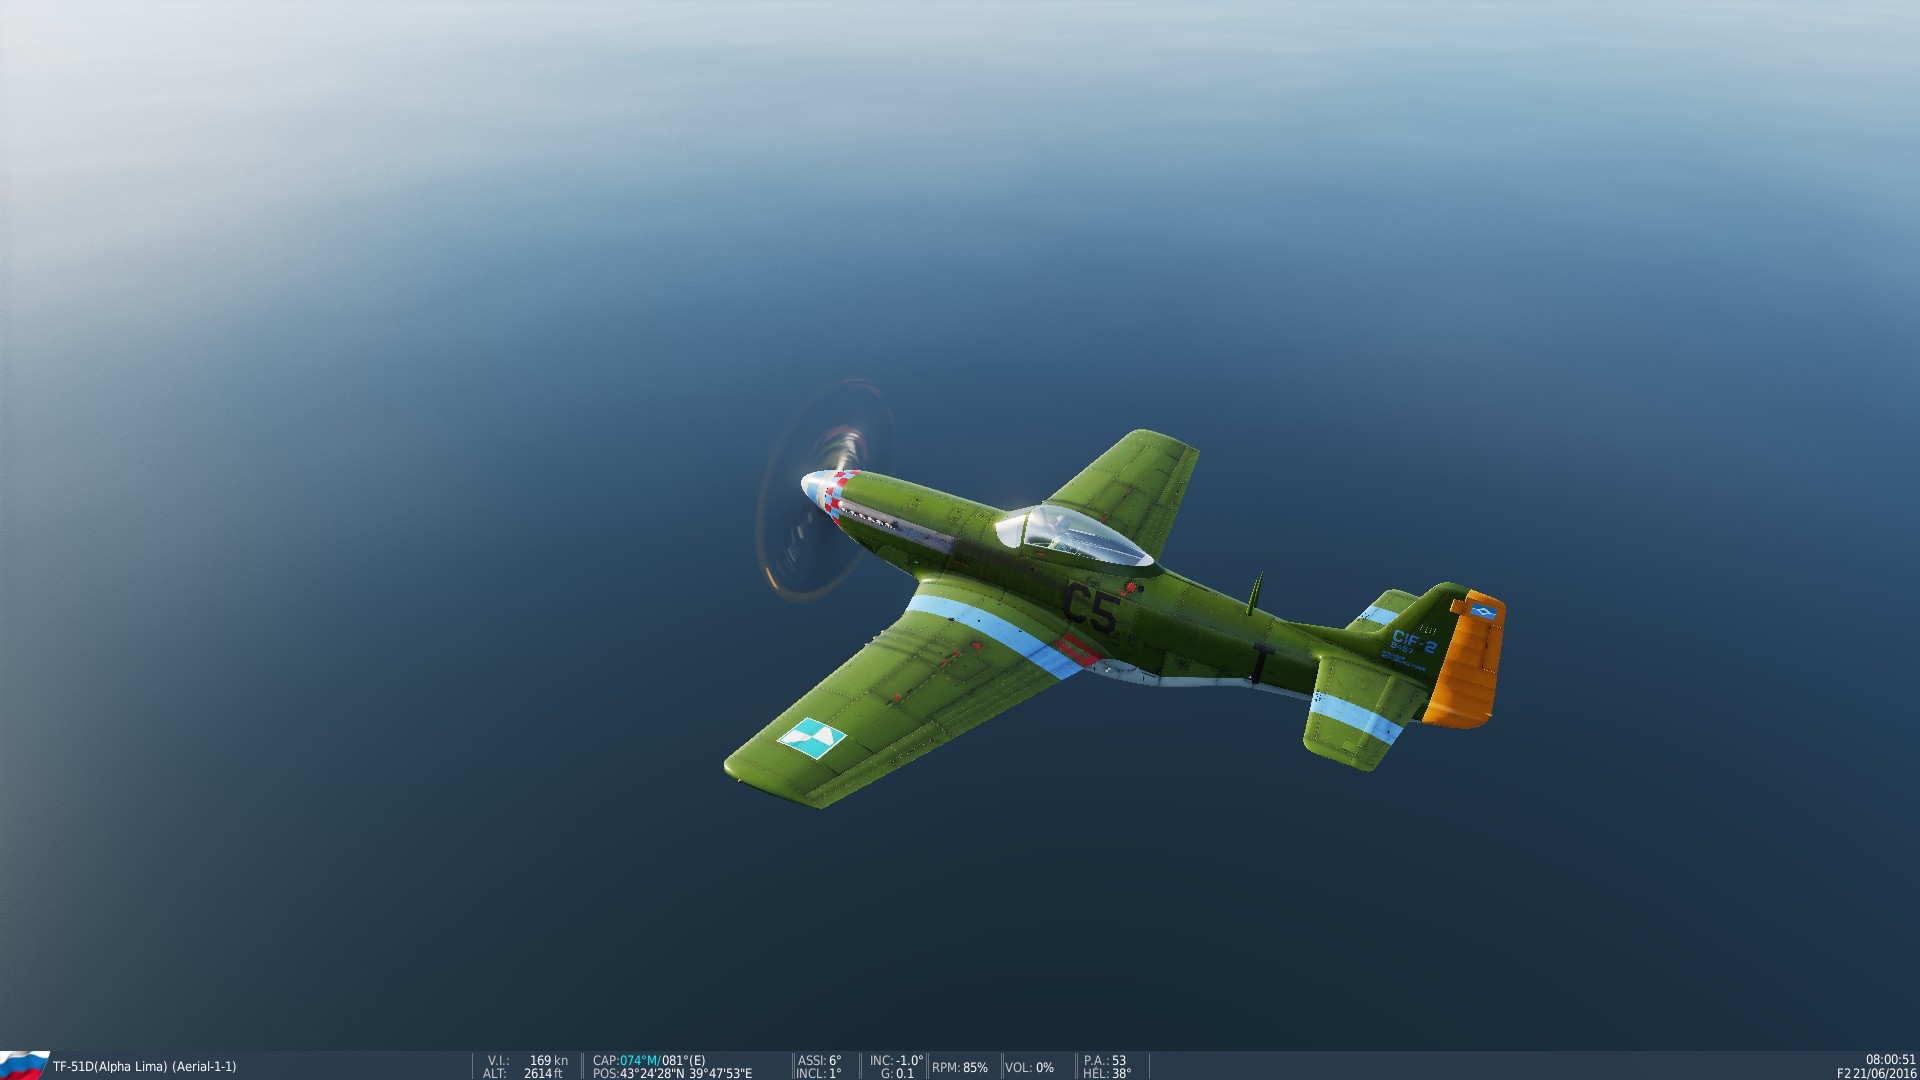 TF-51 Cascadian Independance force